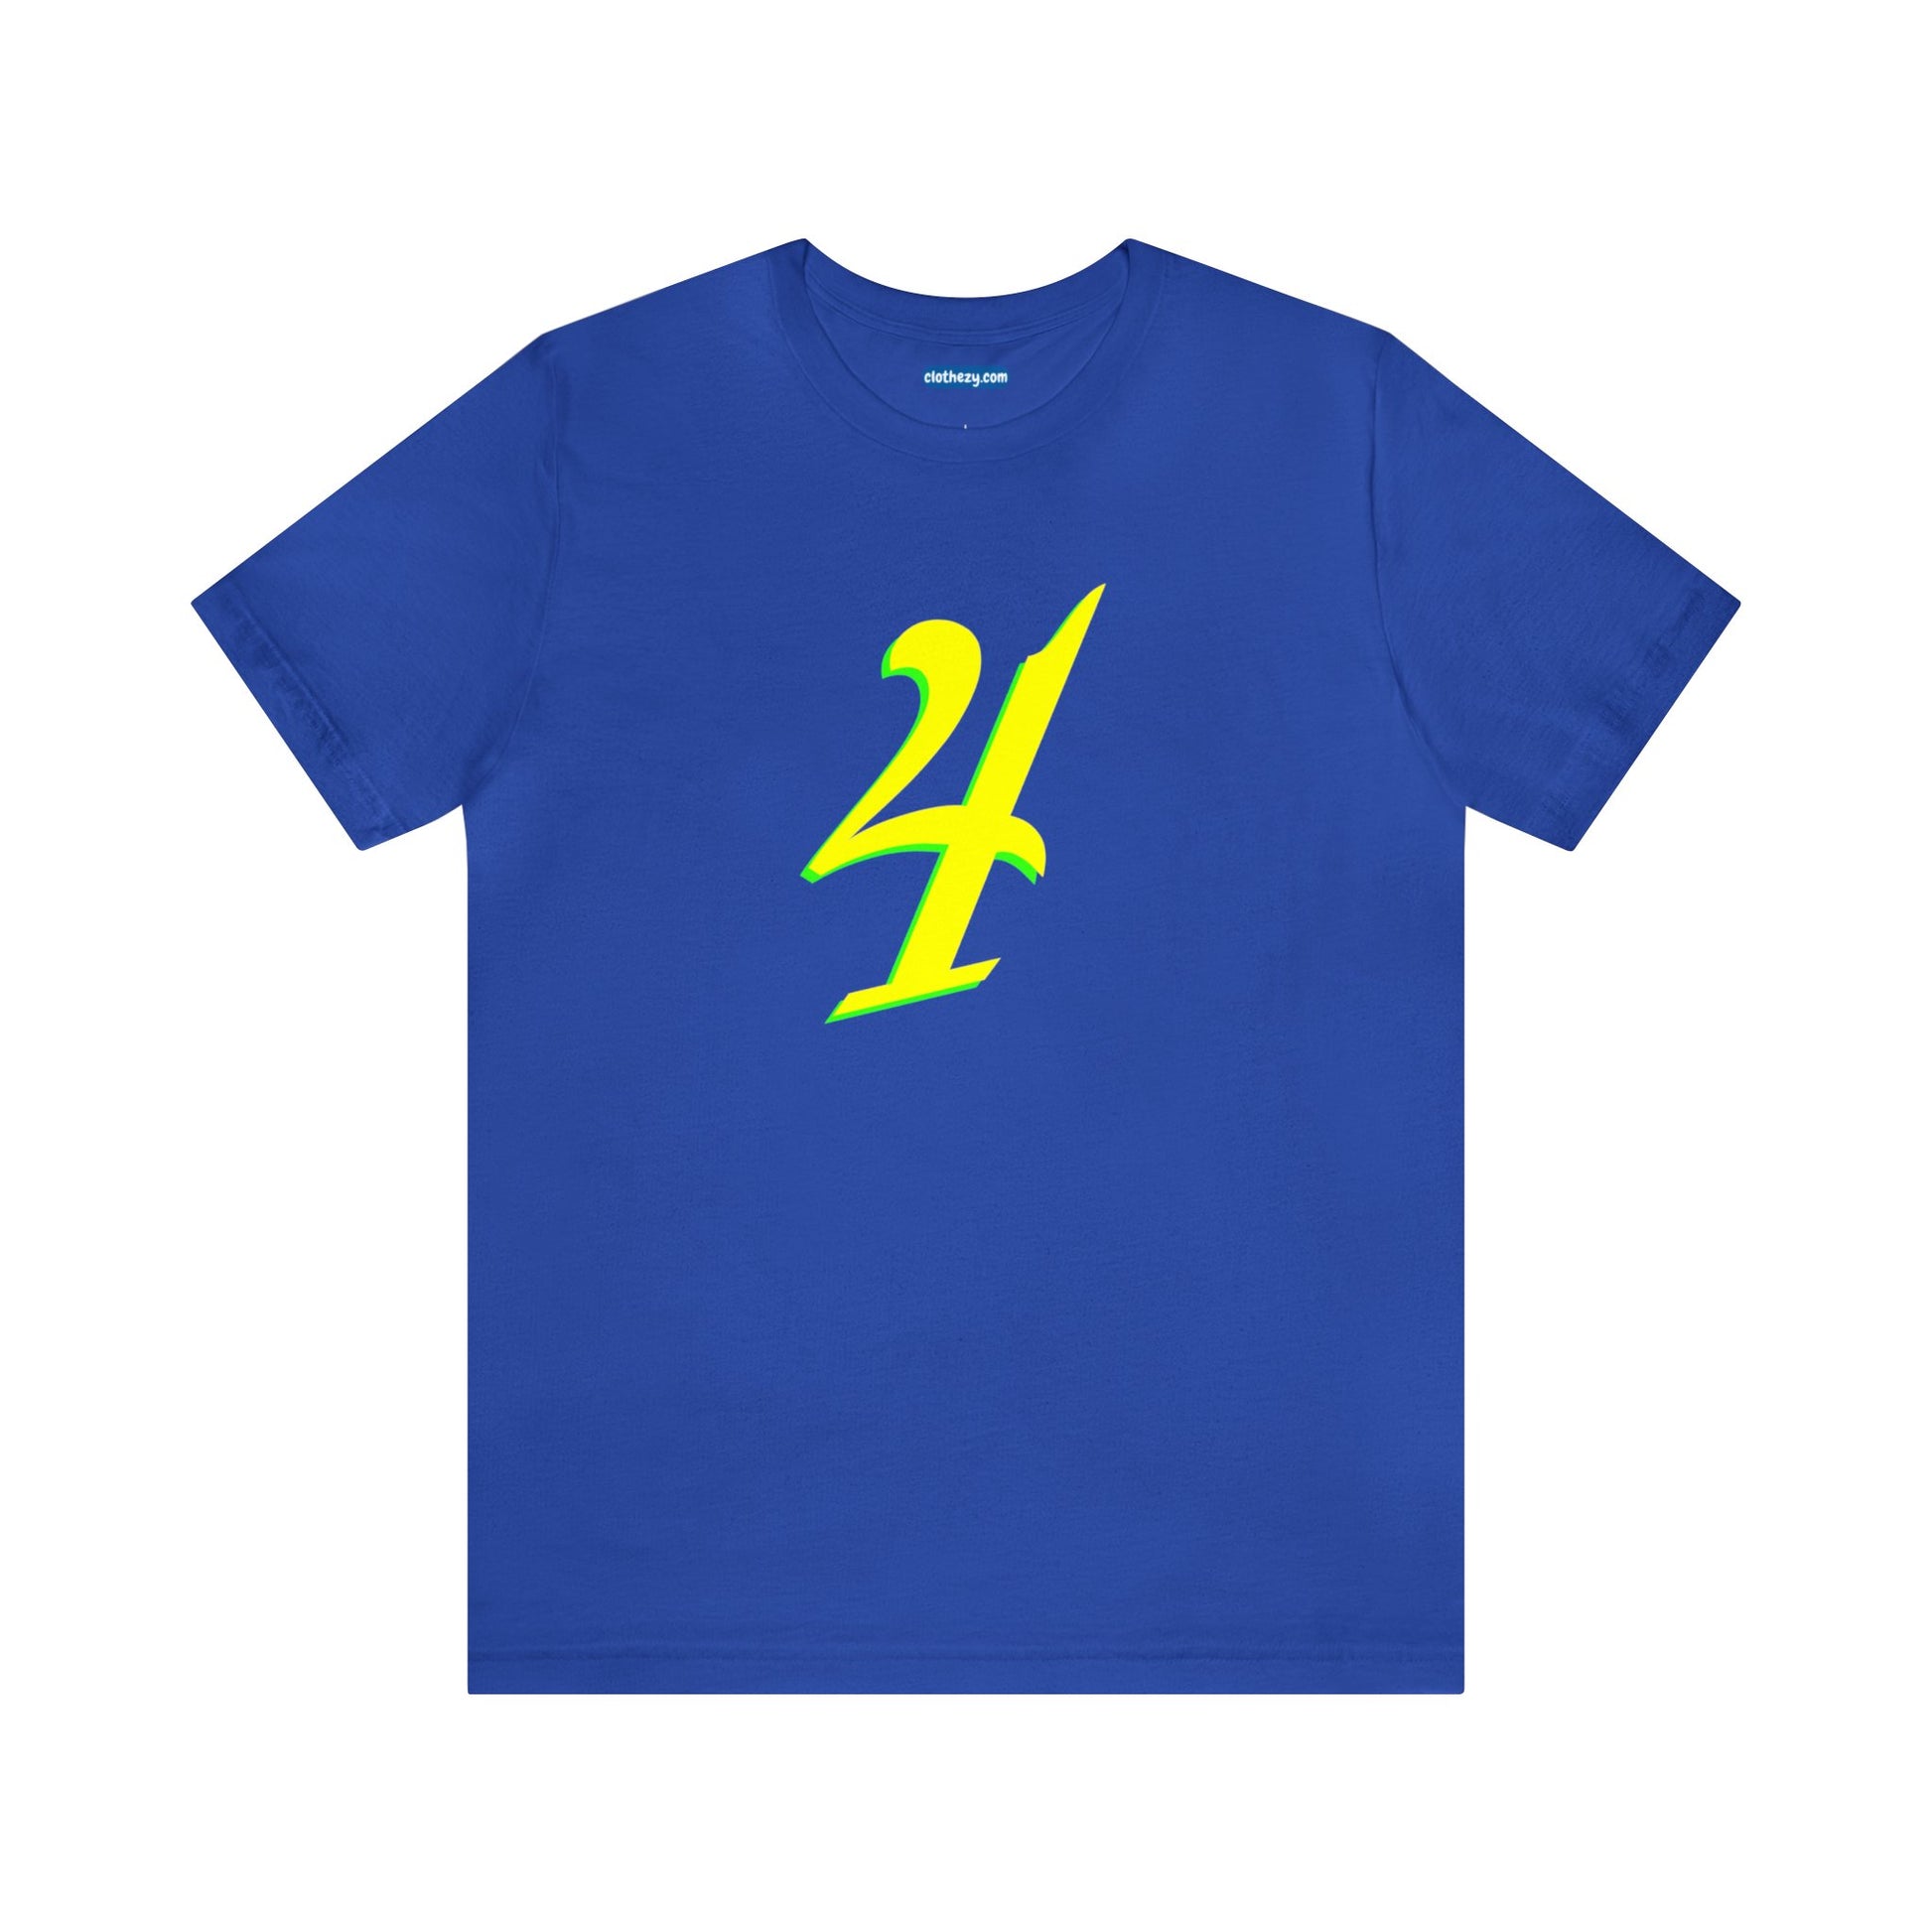 Number 4 Design - Soft Cotton Tee for birthdays and celebrations, Gift for friends and family, Multiple Options by clothezy.com in Royal Blue Size Small - Buy Now